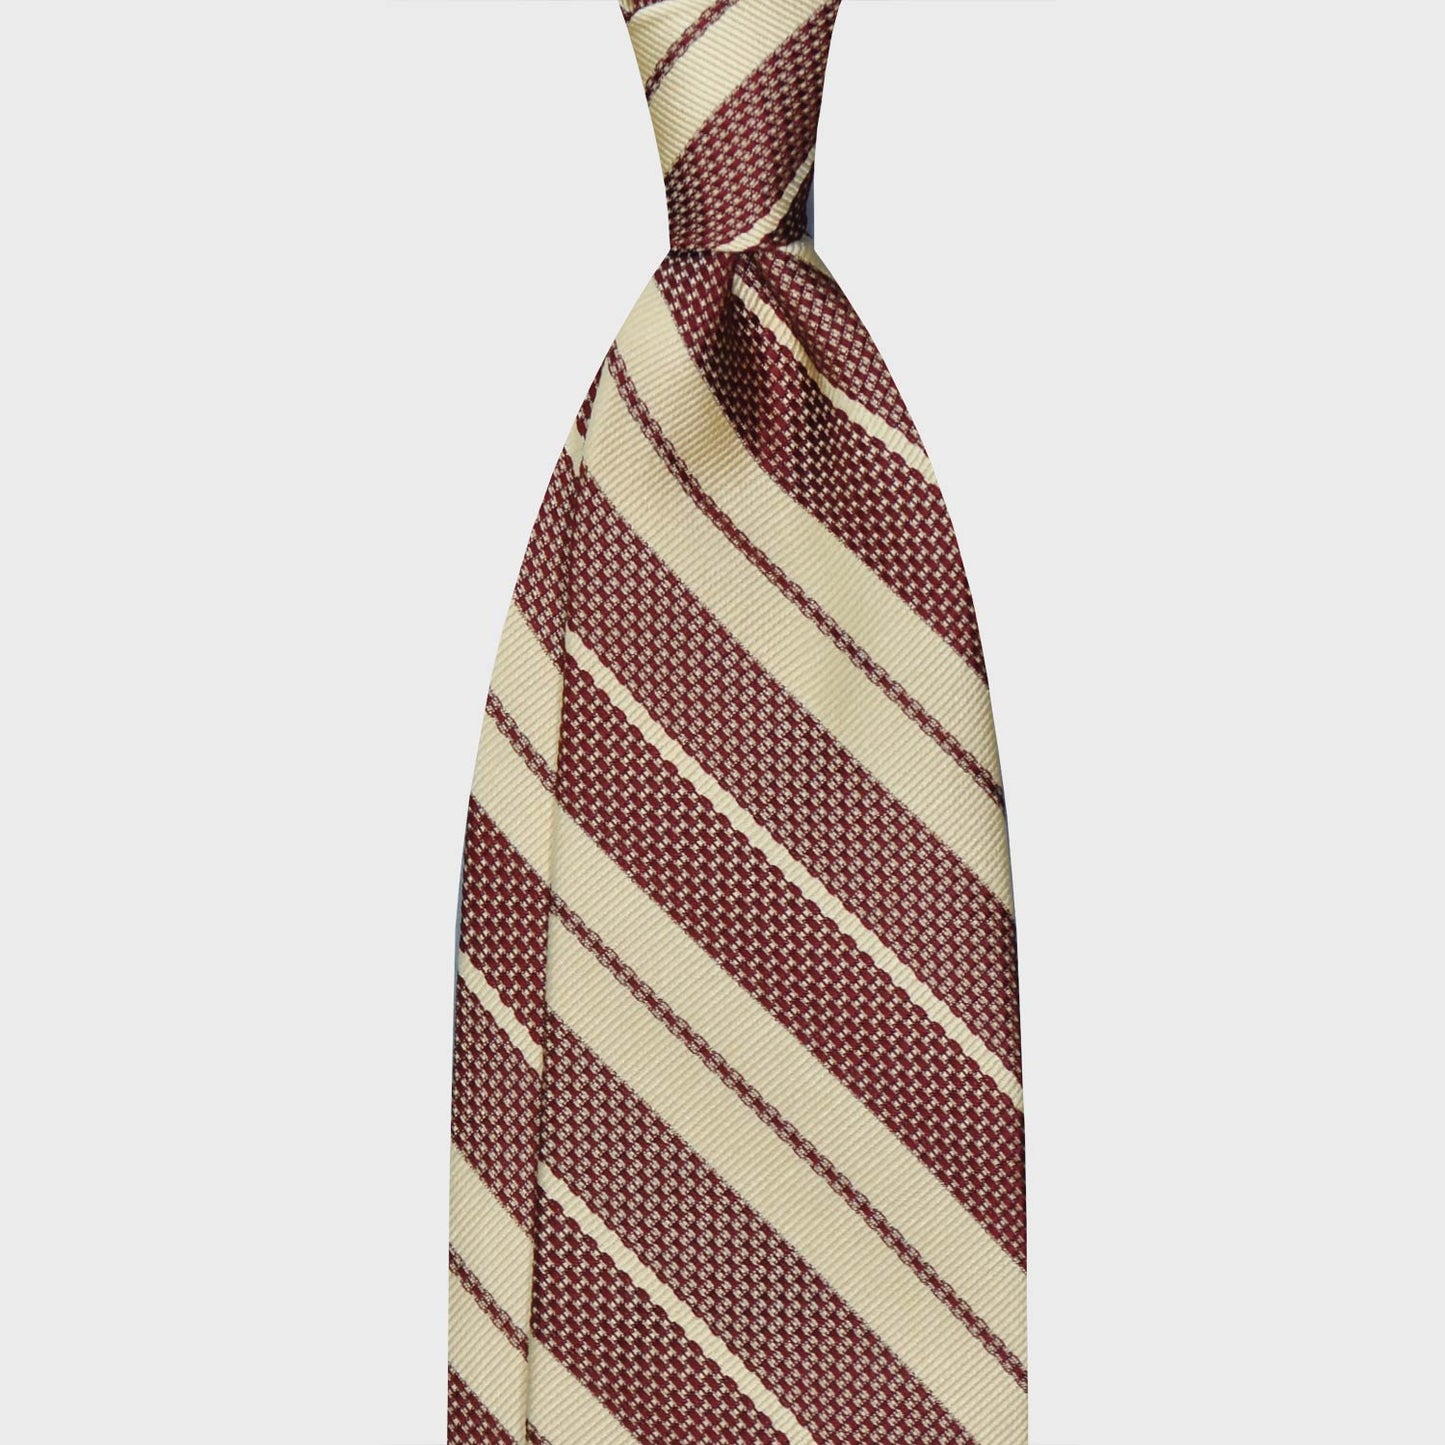 Hay Yellow Grenadine Silk Striped Tie. Regimental grenadine necktie made with grenadine and jacquard silk, hand rolled edge, unlined 3 folds, soft hay yellow background with burgundy red striped, F.Marino Napoli exclusive for Wools Boutique Uomo